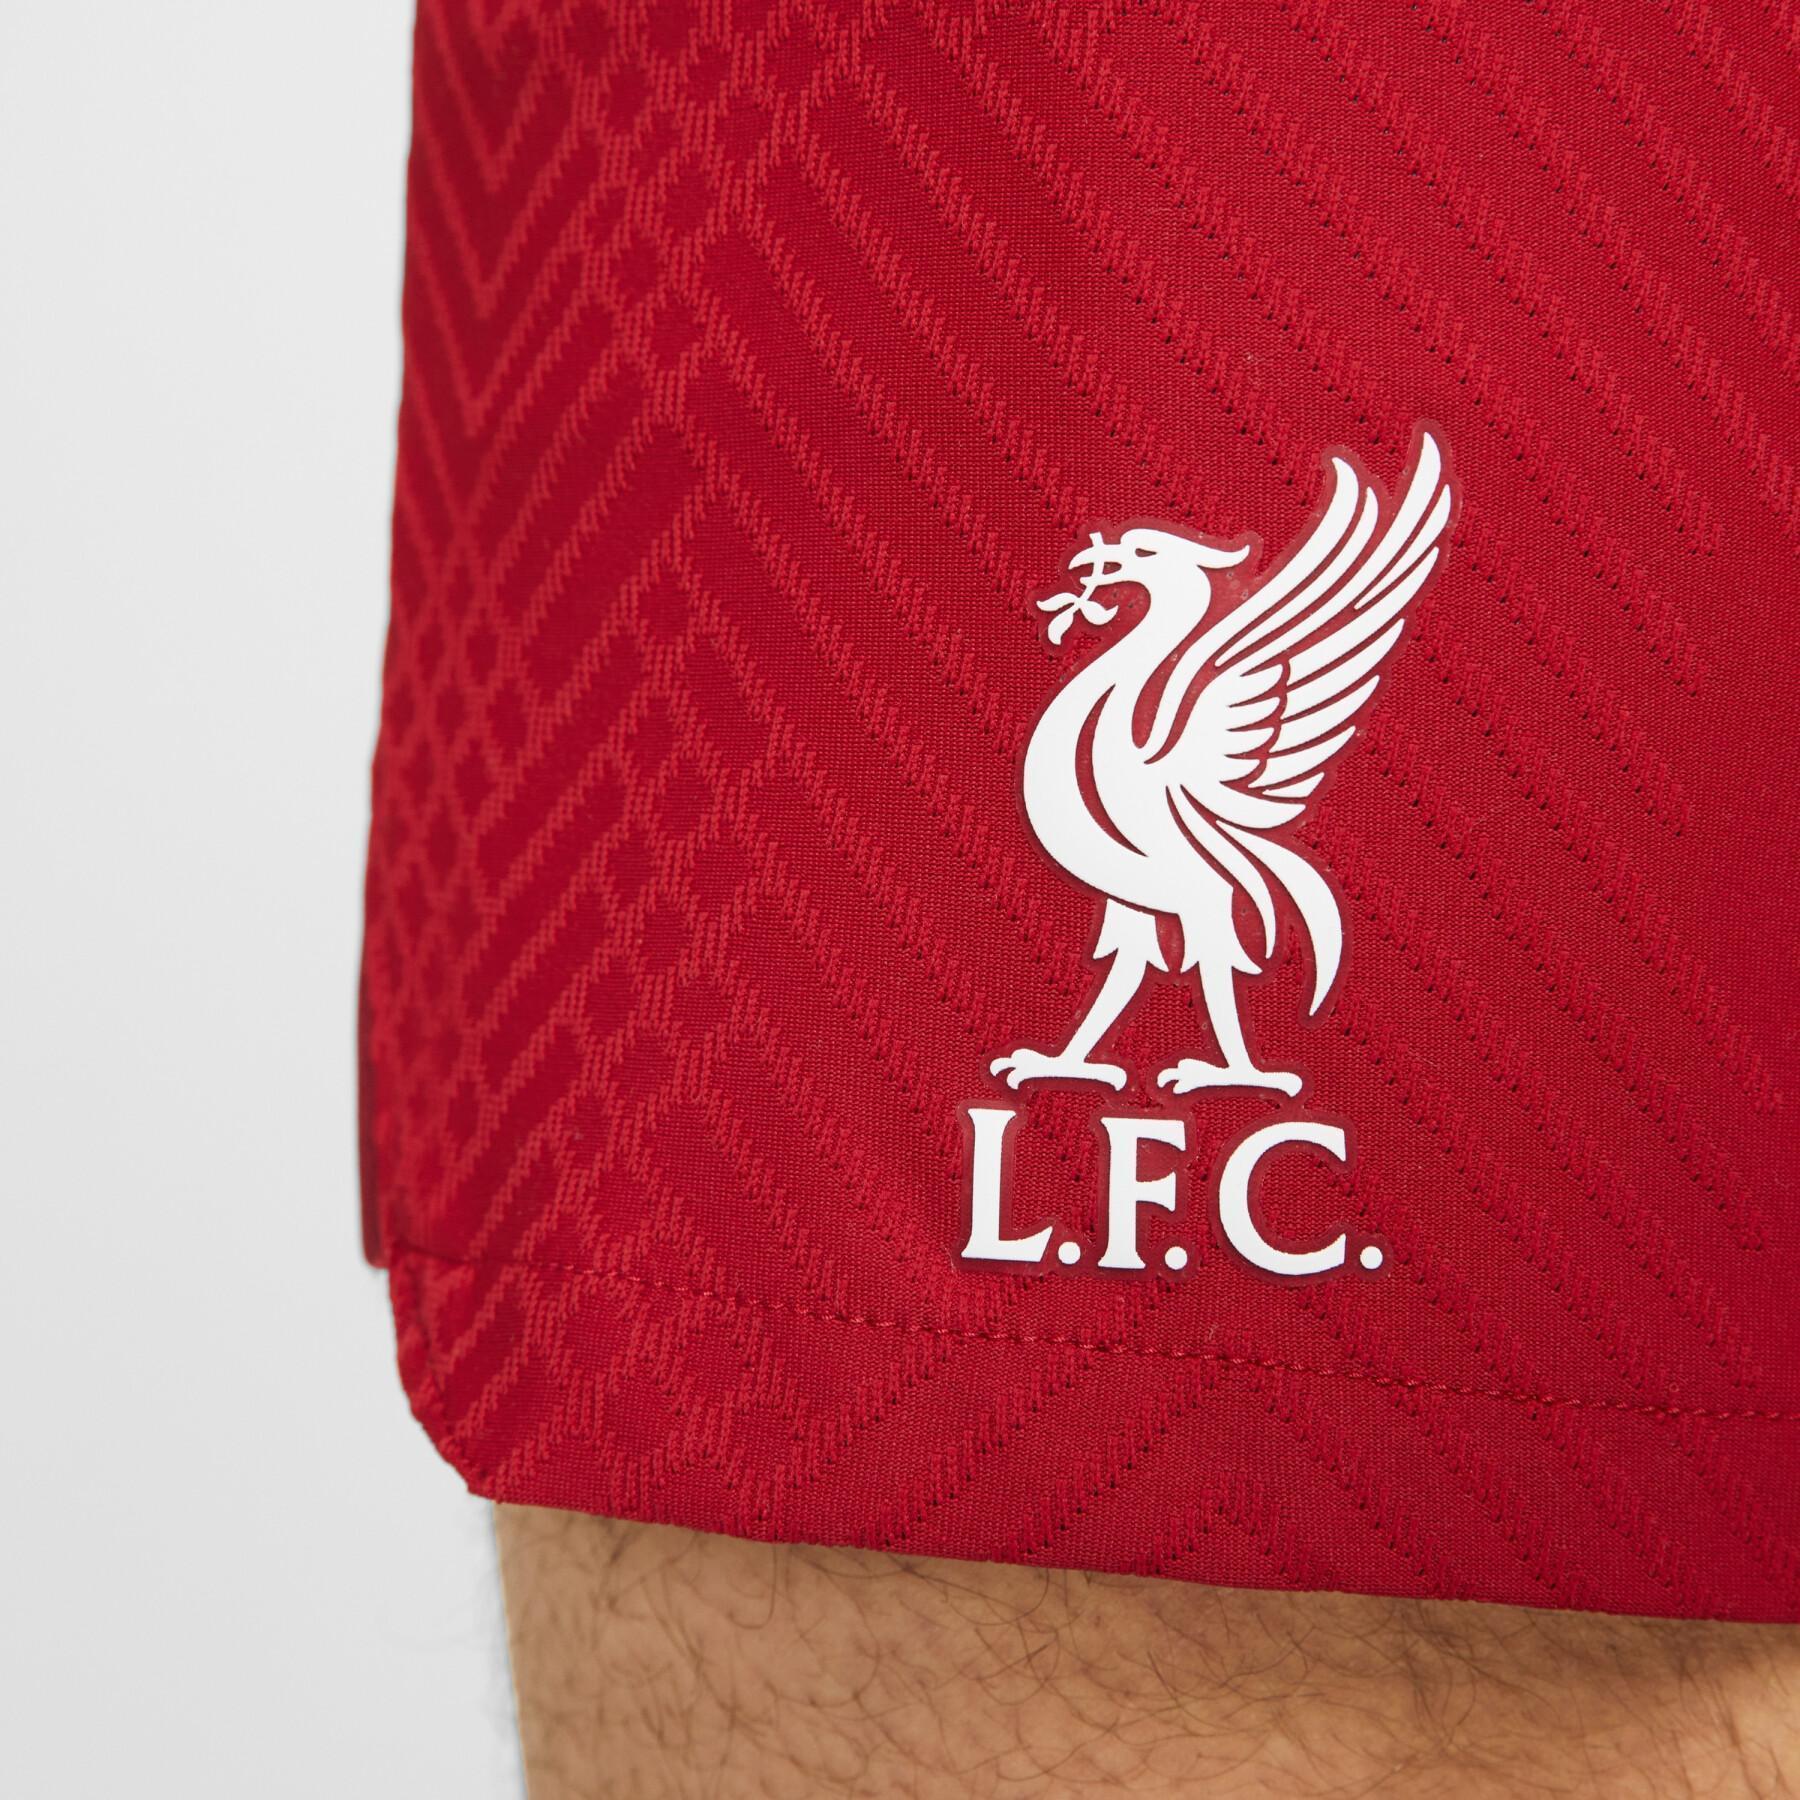 Authentic home shorts Liverpool FC 2022/23